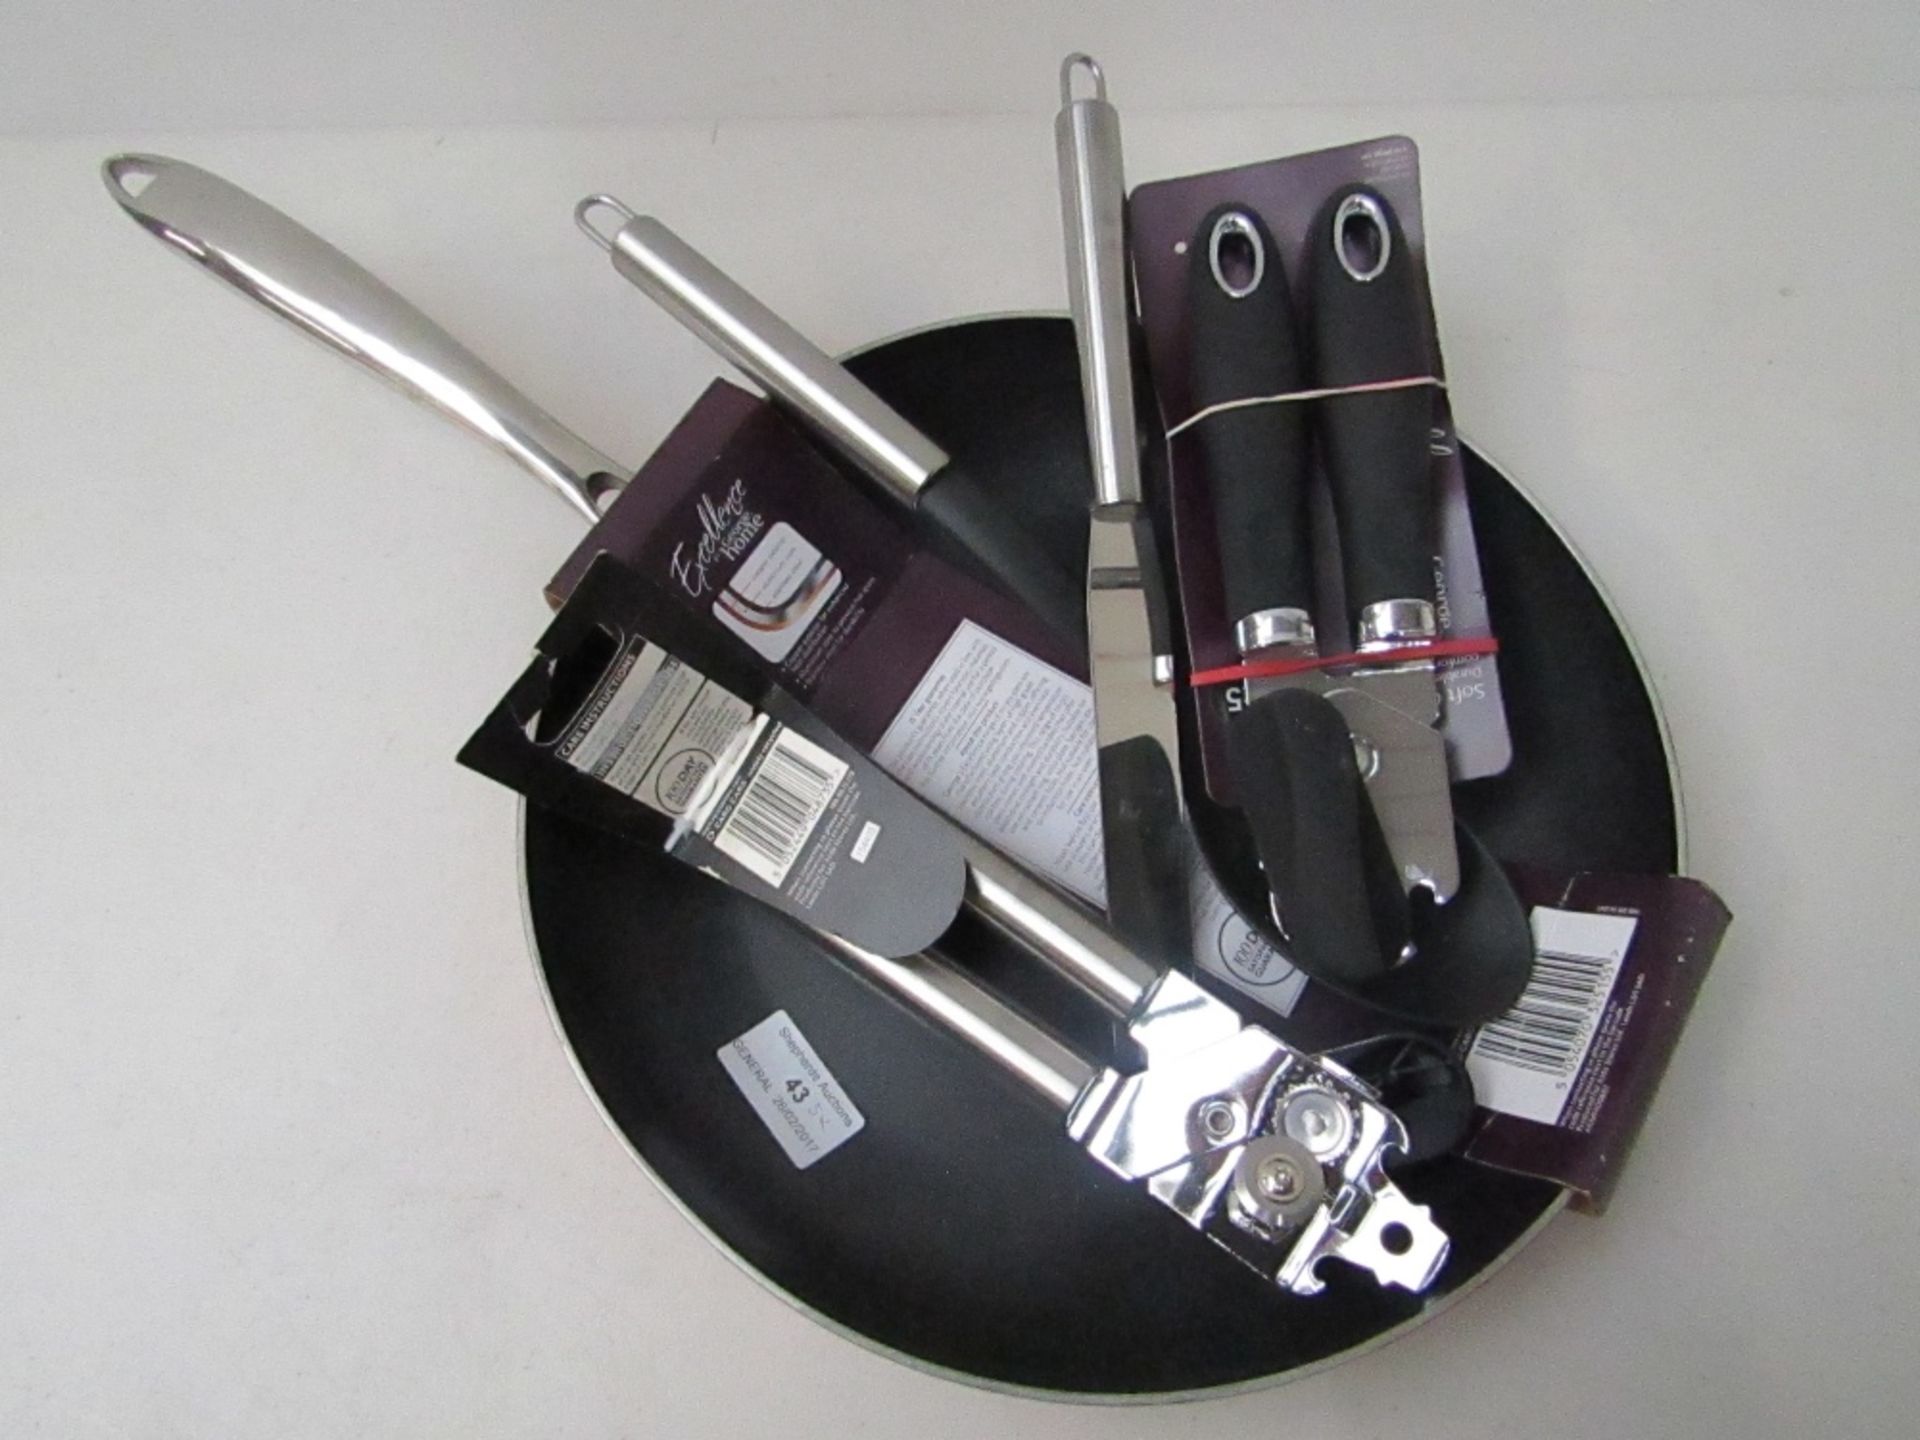 5 items being, 2x can openers, metal handled cooking spoon, knife spatula, George home Tri-play